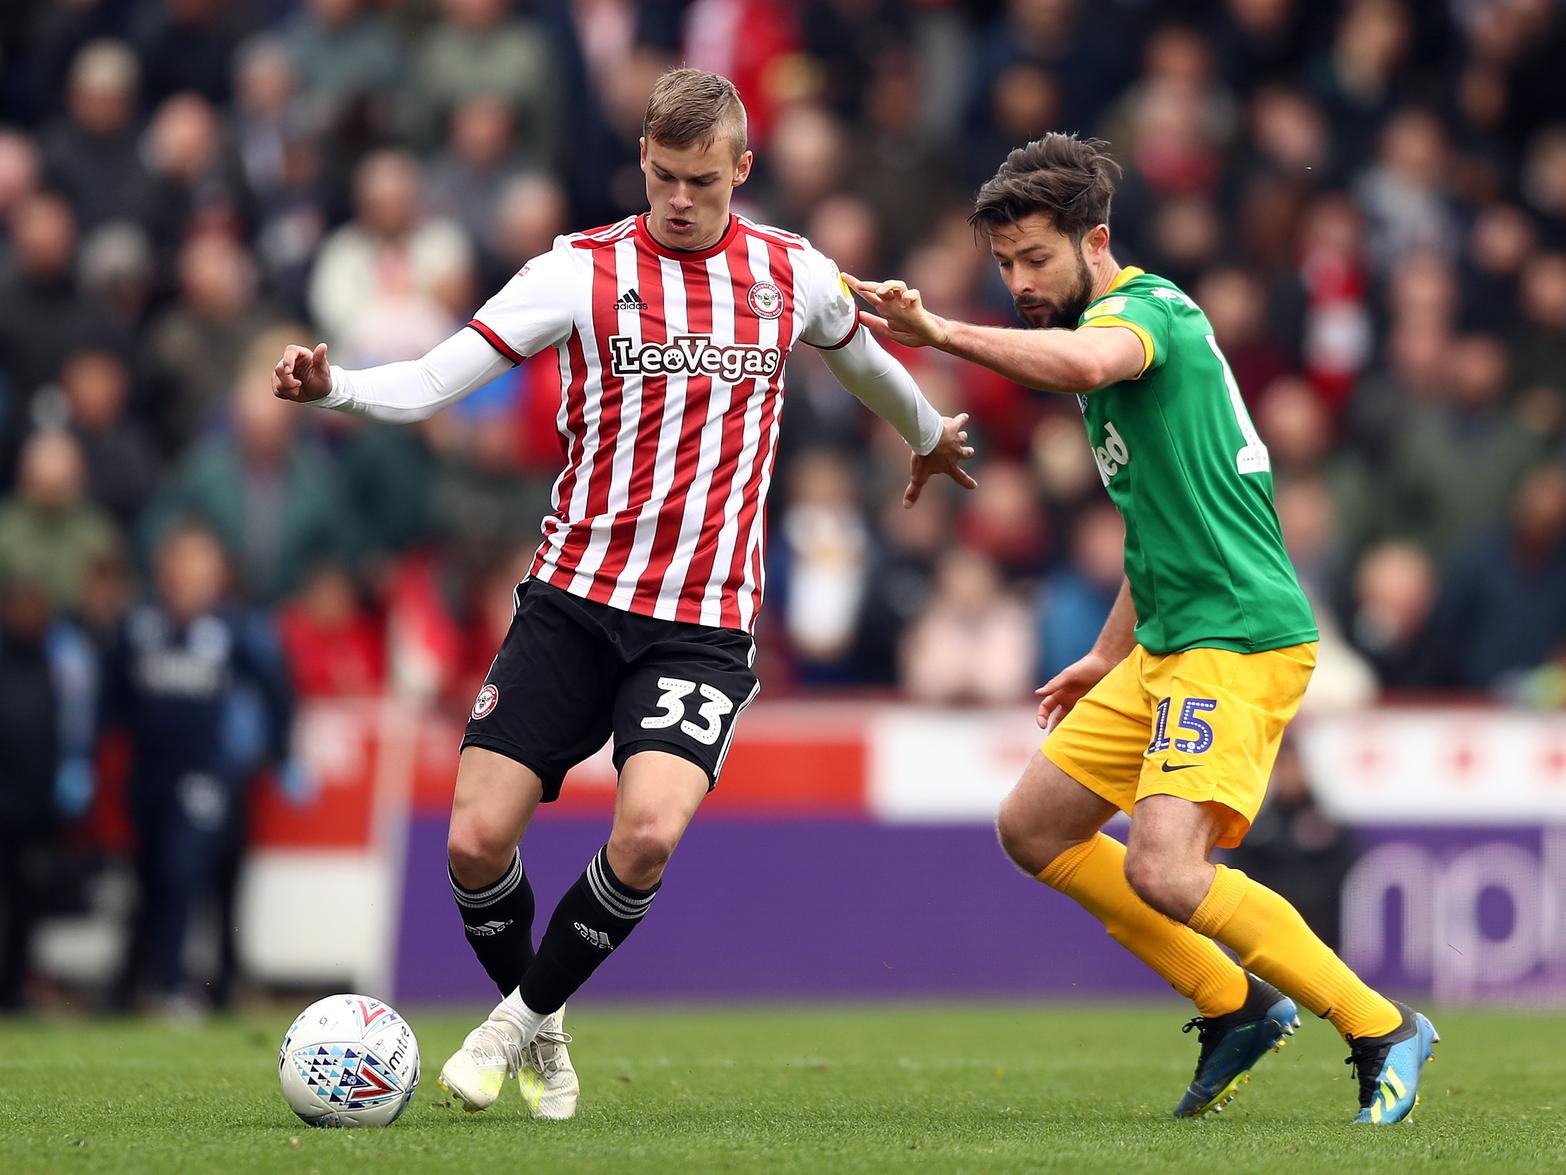 Brentford striker Marcus Forss looks likely to return to the club from his loan spell with AFC Wimbledon in January, but could be set for a Premier League move with the likes of West Ham and Brighton interested. (Team Talk)